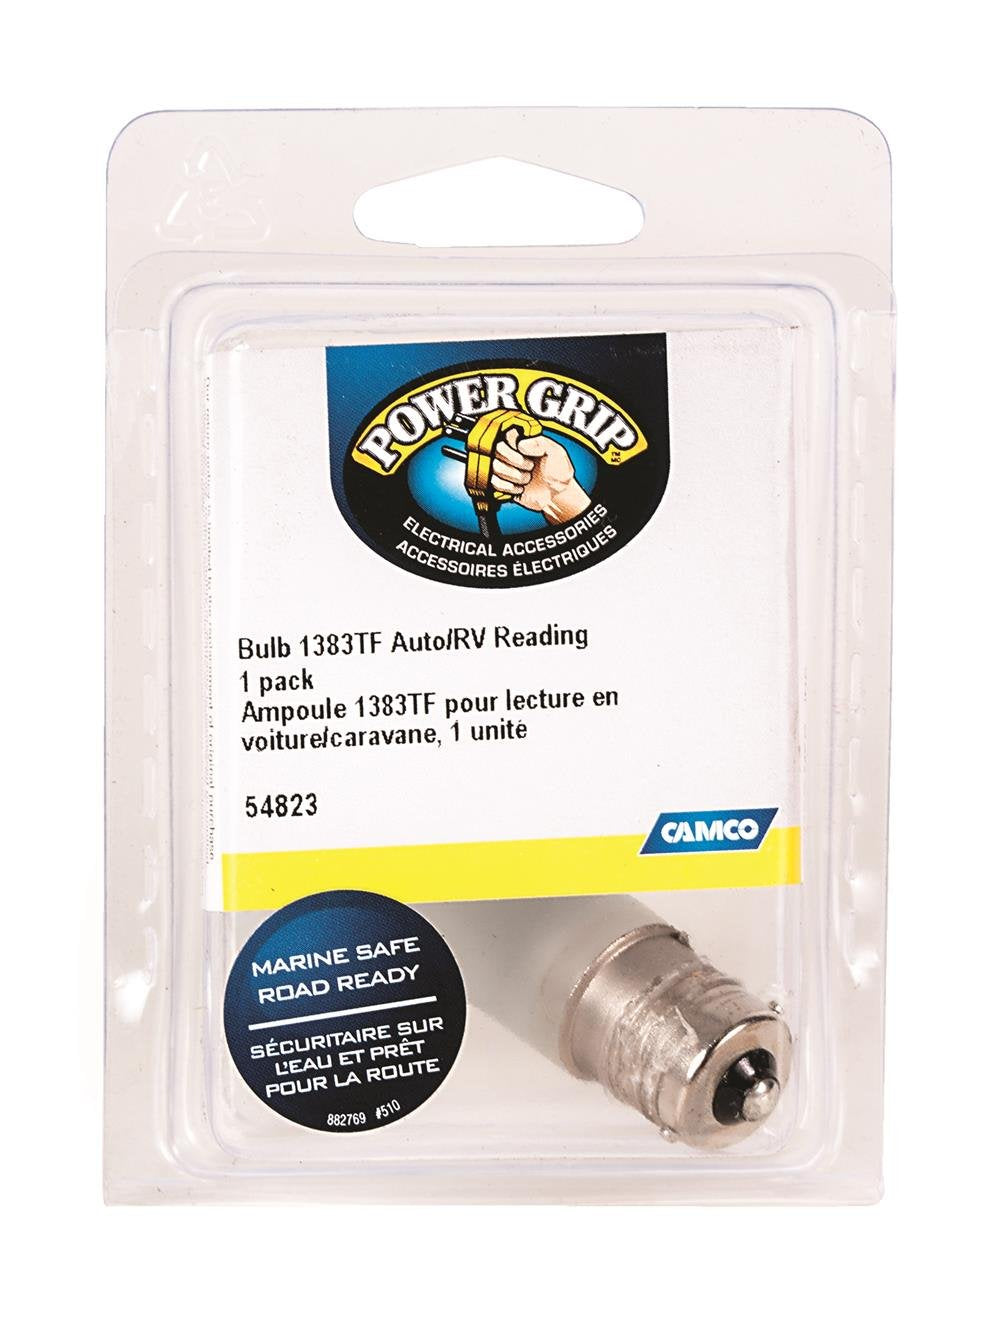 Camco 54823 1383 Auto/RV Replacement Reading Light Bulb